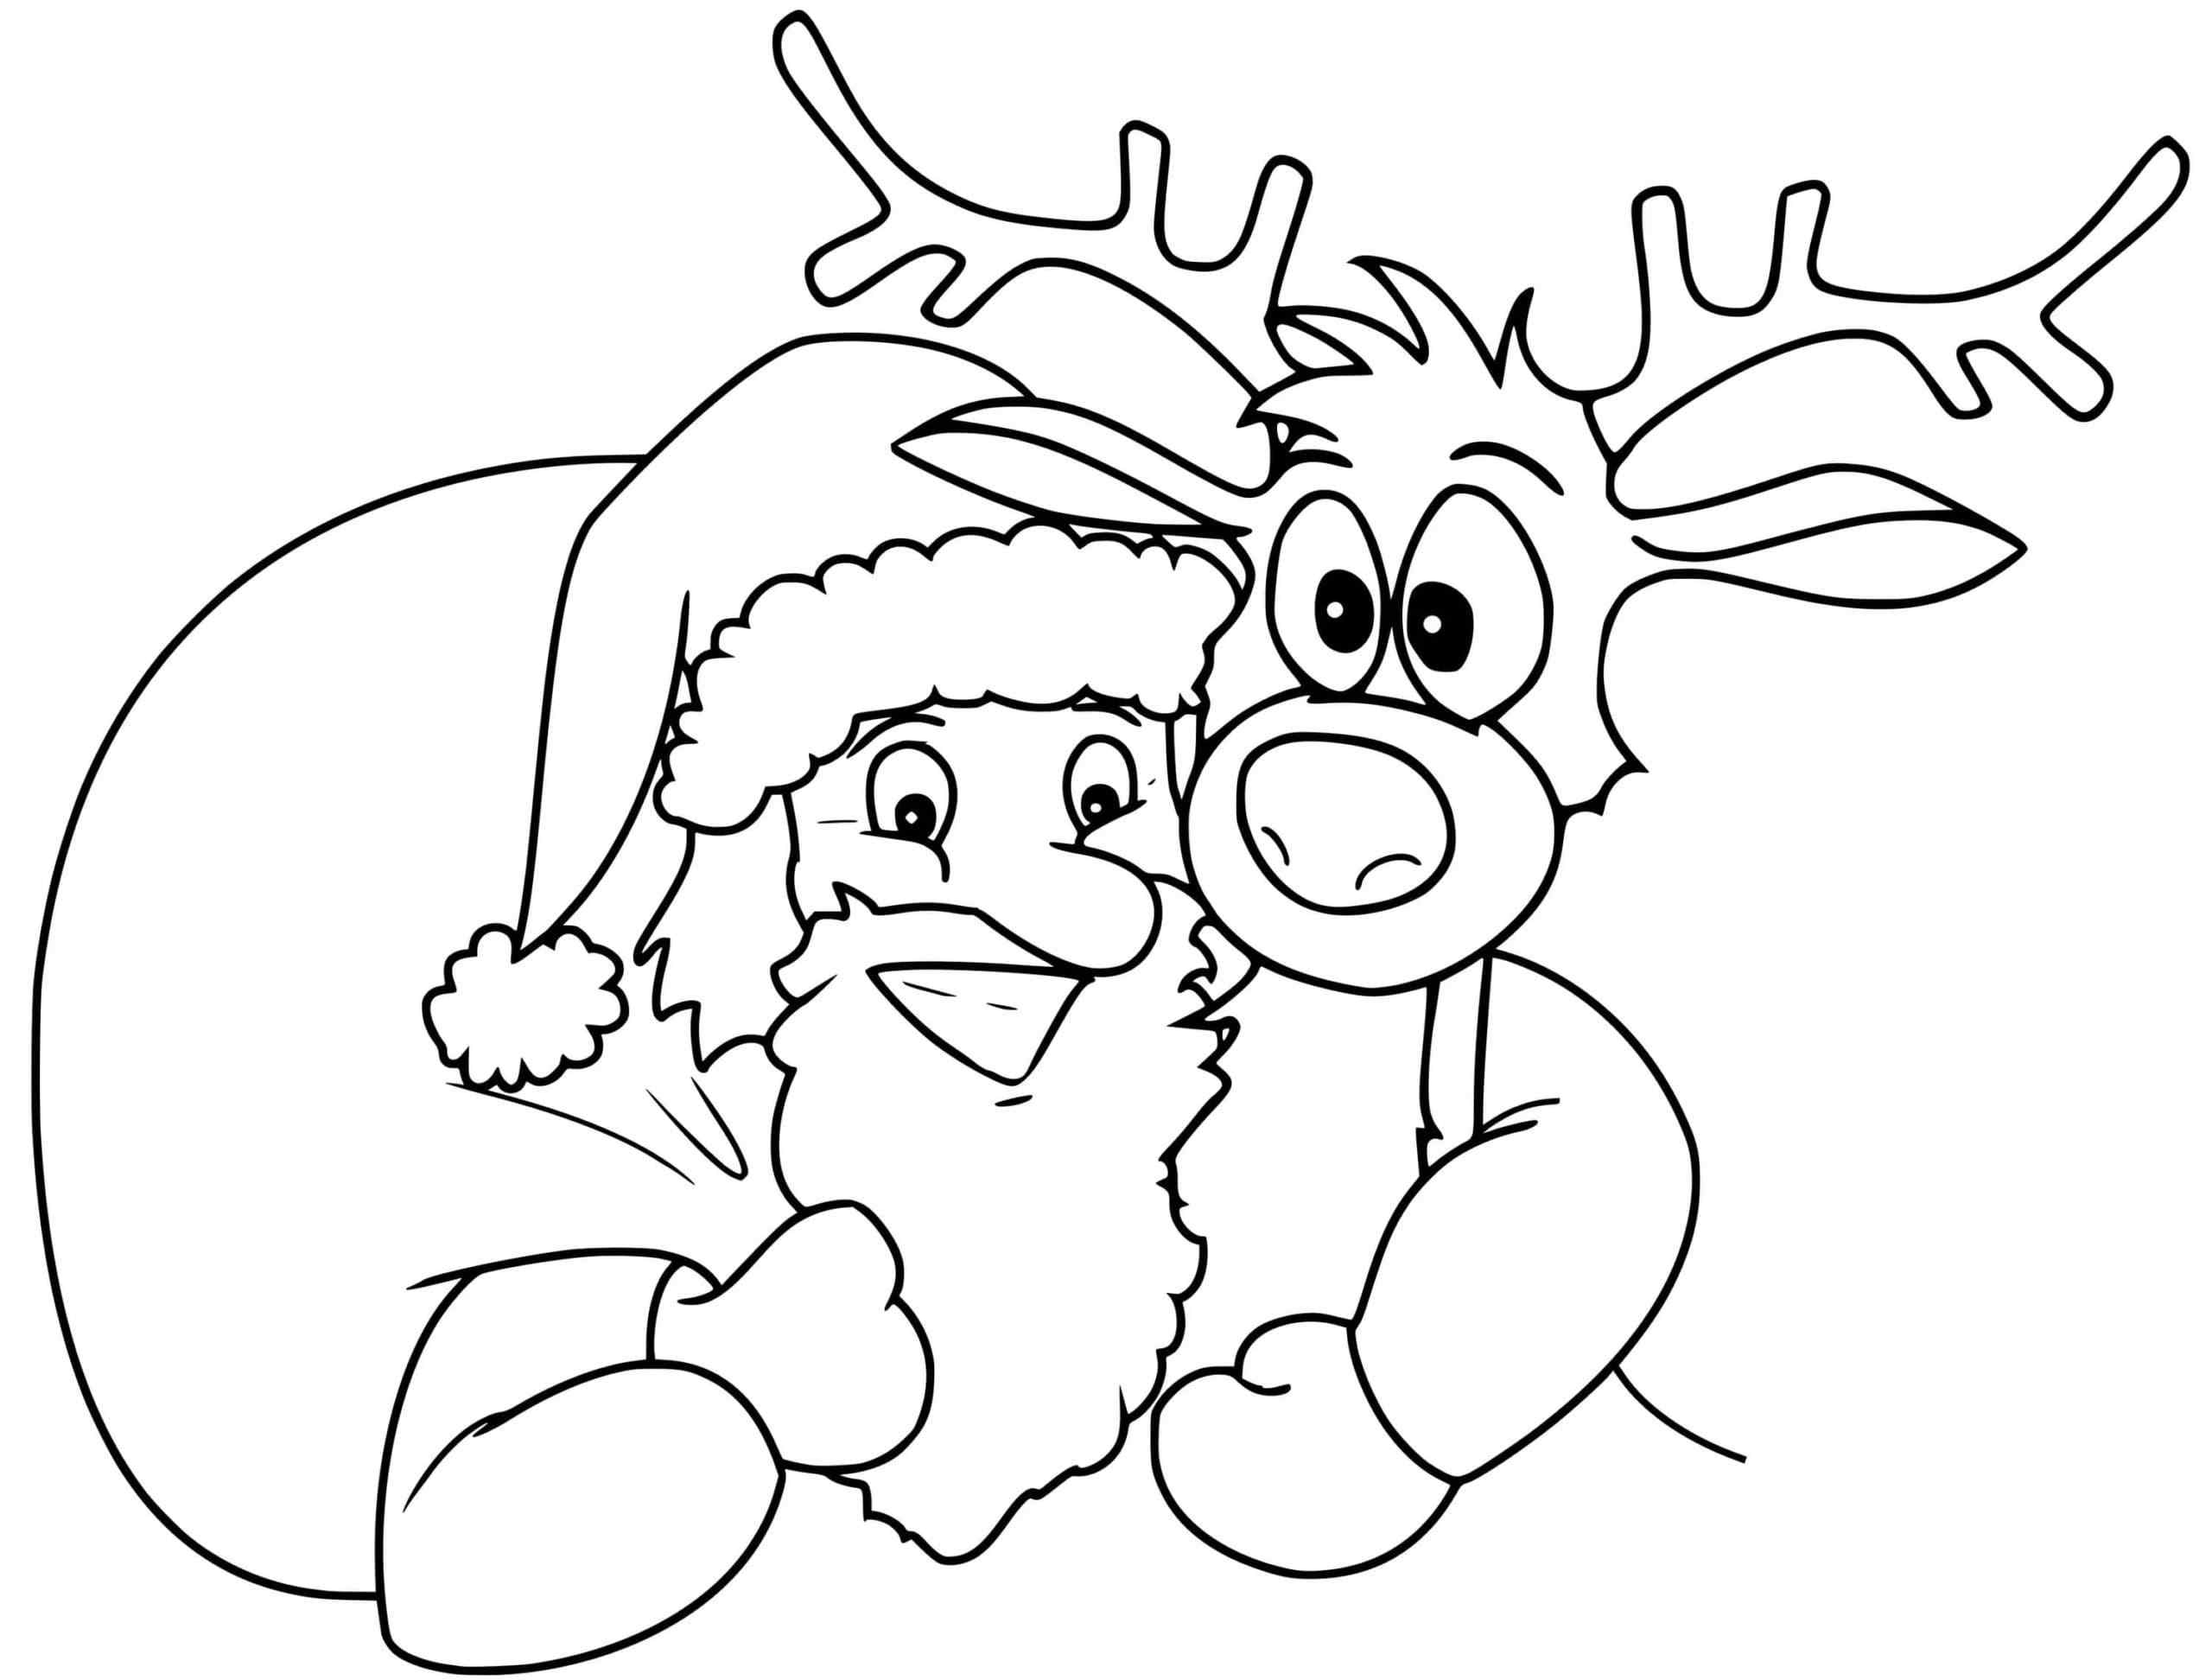 Strangle The Deer From Great Love Coloring Page